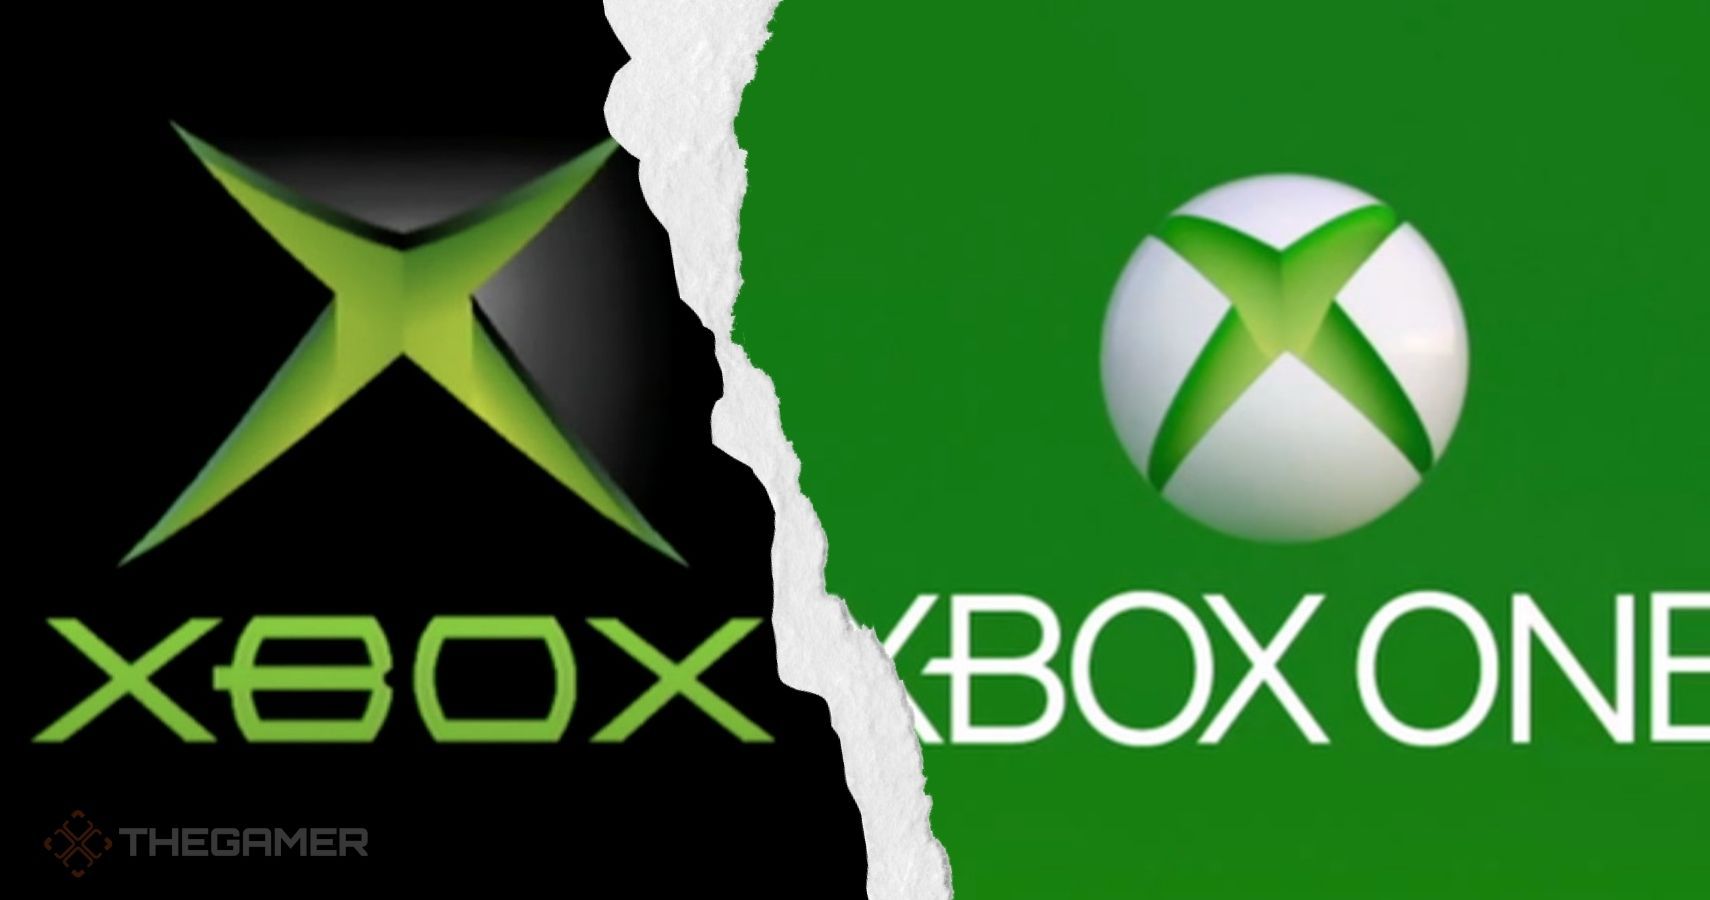 Two Xbox logos side to side. One is black and green, the other green and white. Both feature as massive X symbol.